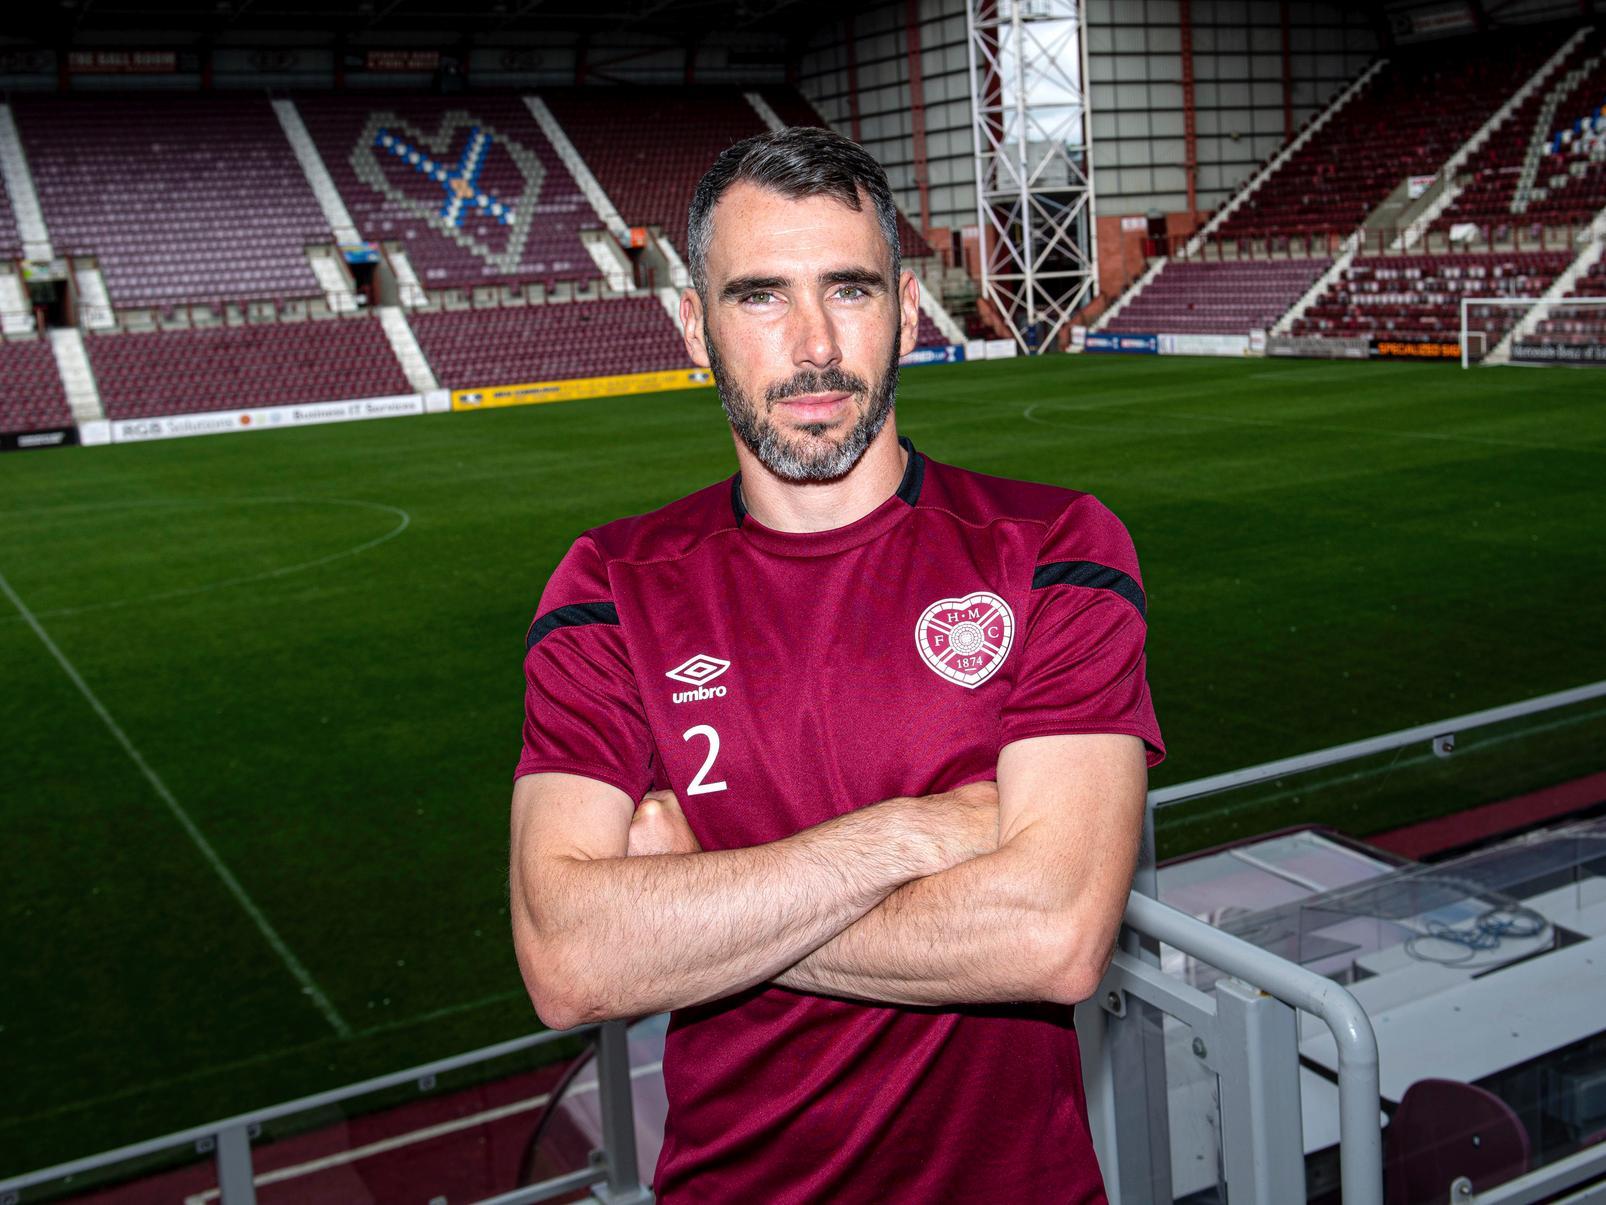 Played in central midfield before the break and moved to right-back in second half. Subbed at 4-0 but appeared to be injured. One of Hearts' better performers.